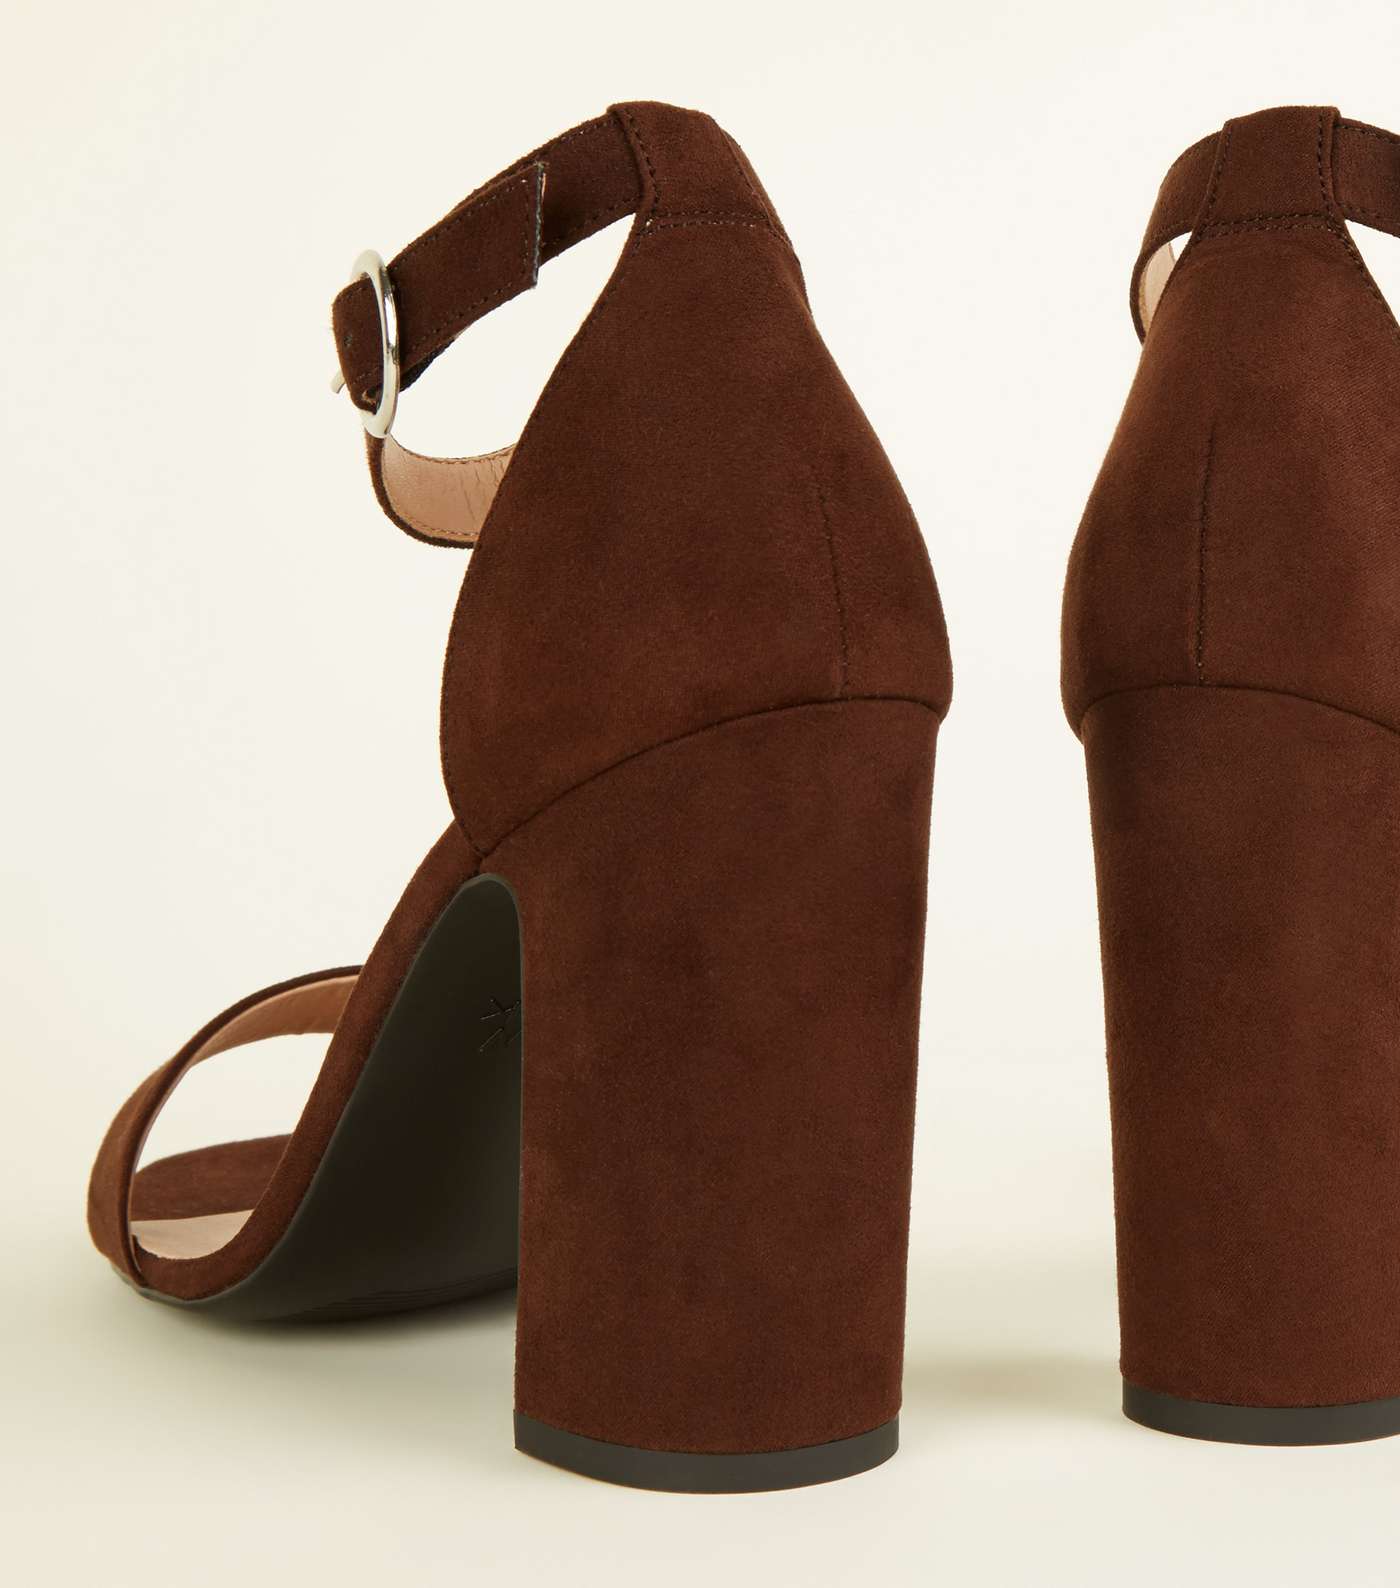 Rust Suedette Barely There Block Heels Image 4